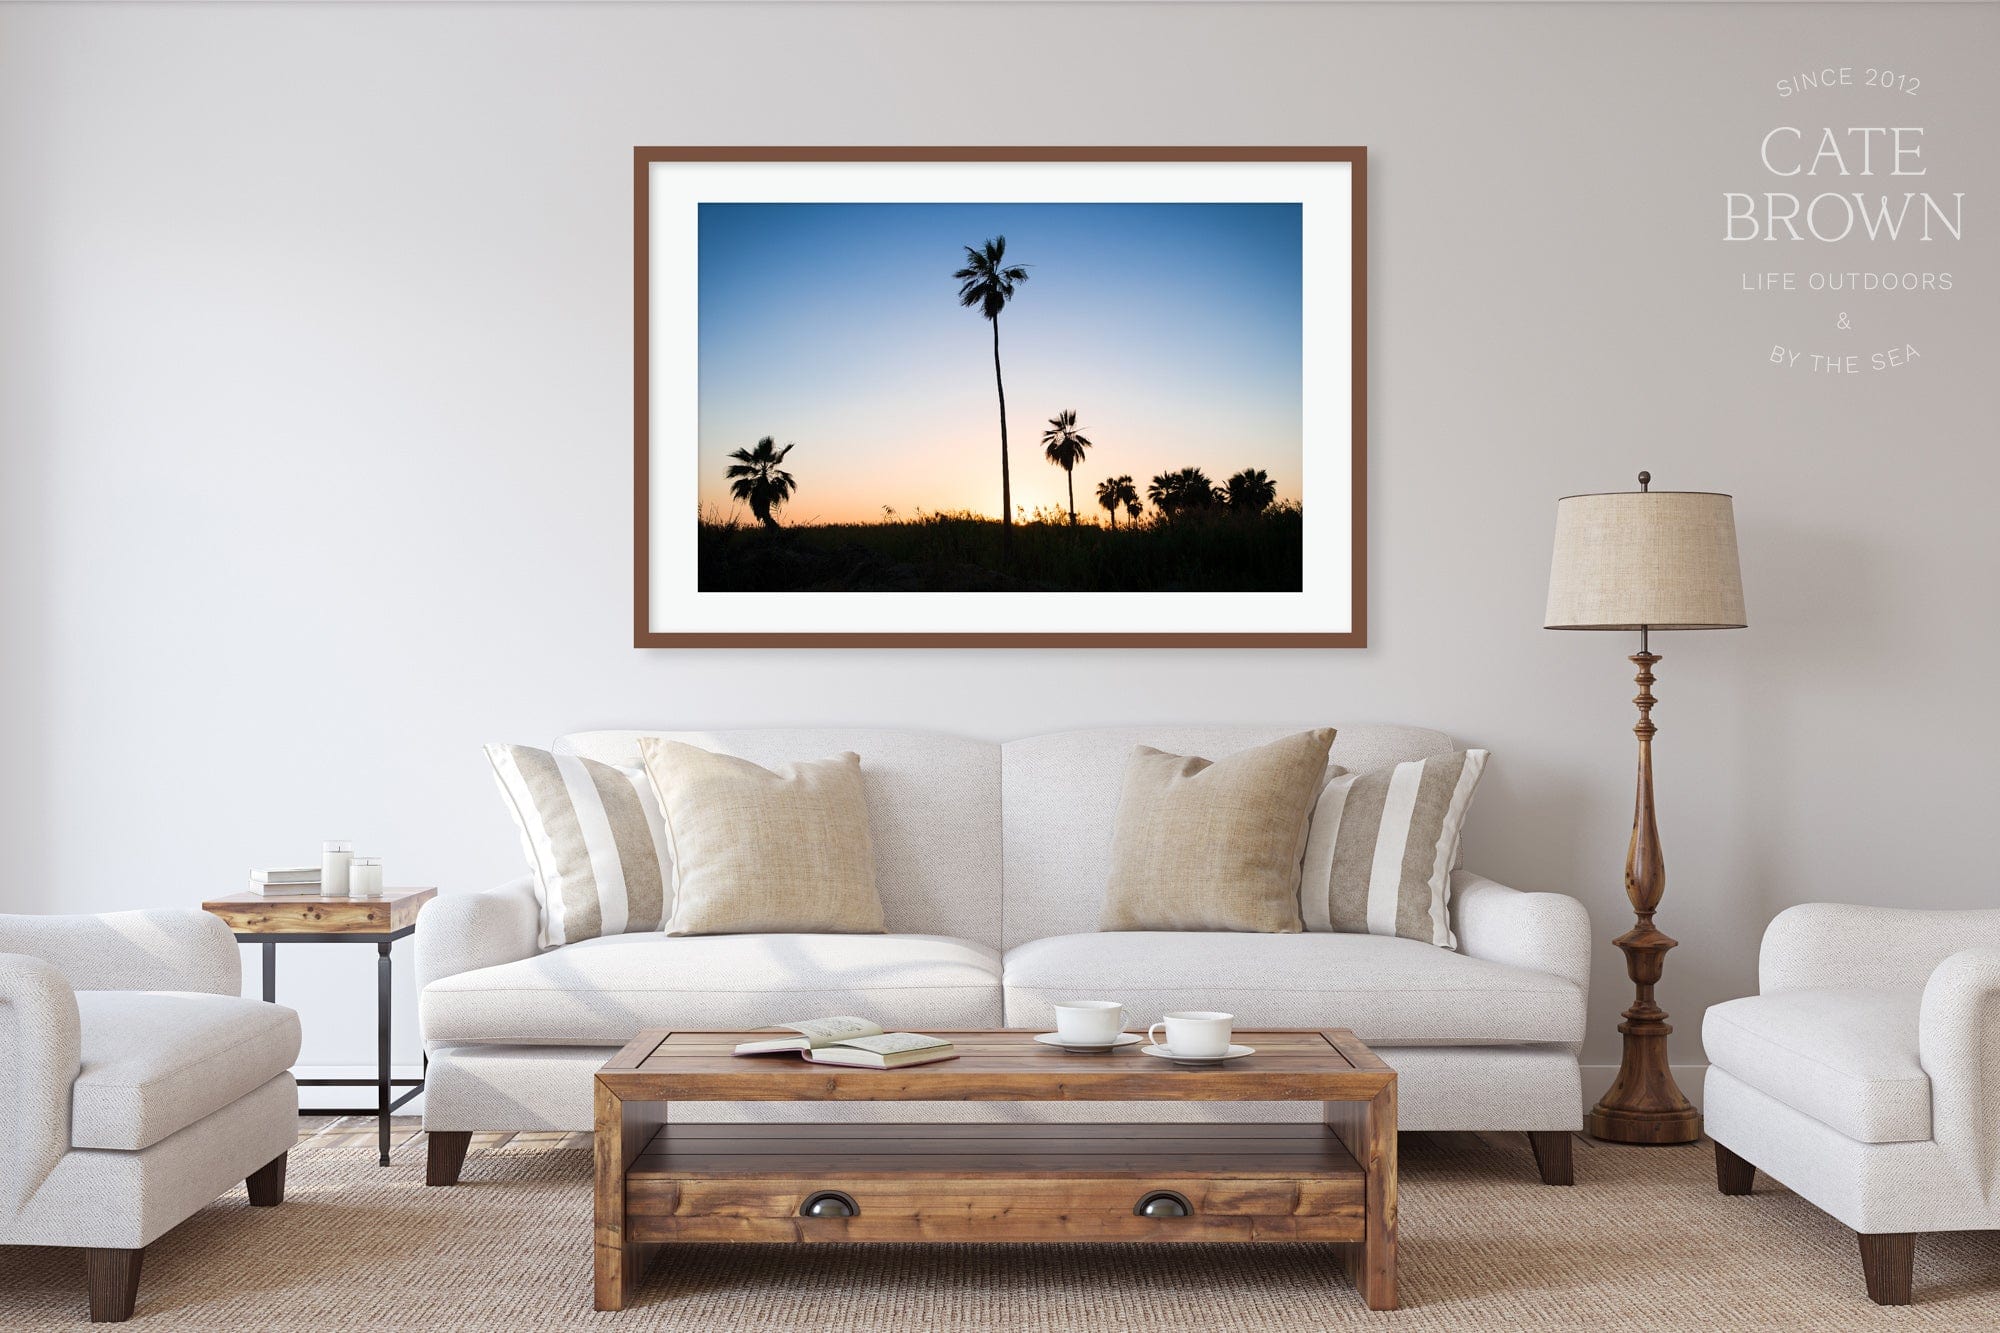 Cate Brown Photo Fine Art Print / 8"x12" / None (Print Only) Baja Palms #1  //  Landscape Photography Made to Order Ocean Fine Art